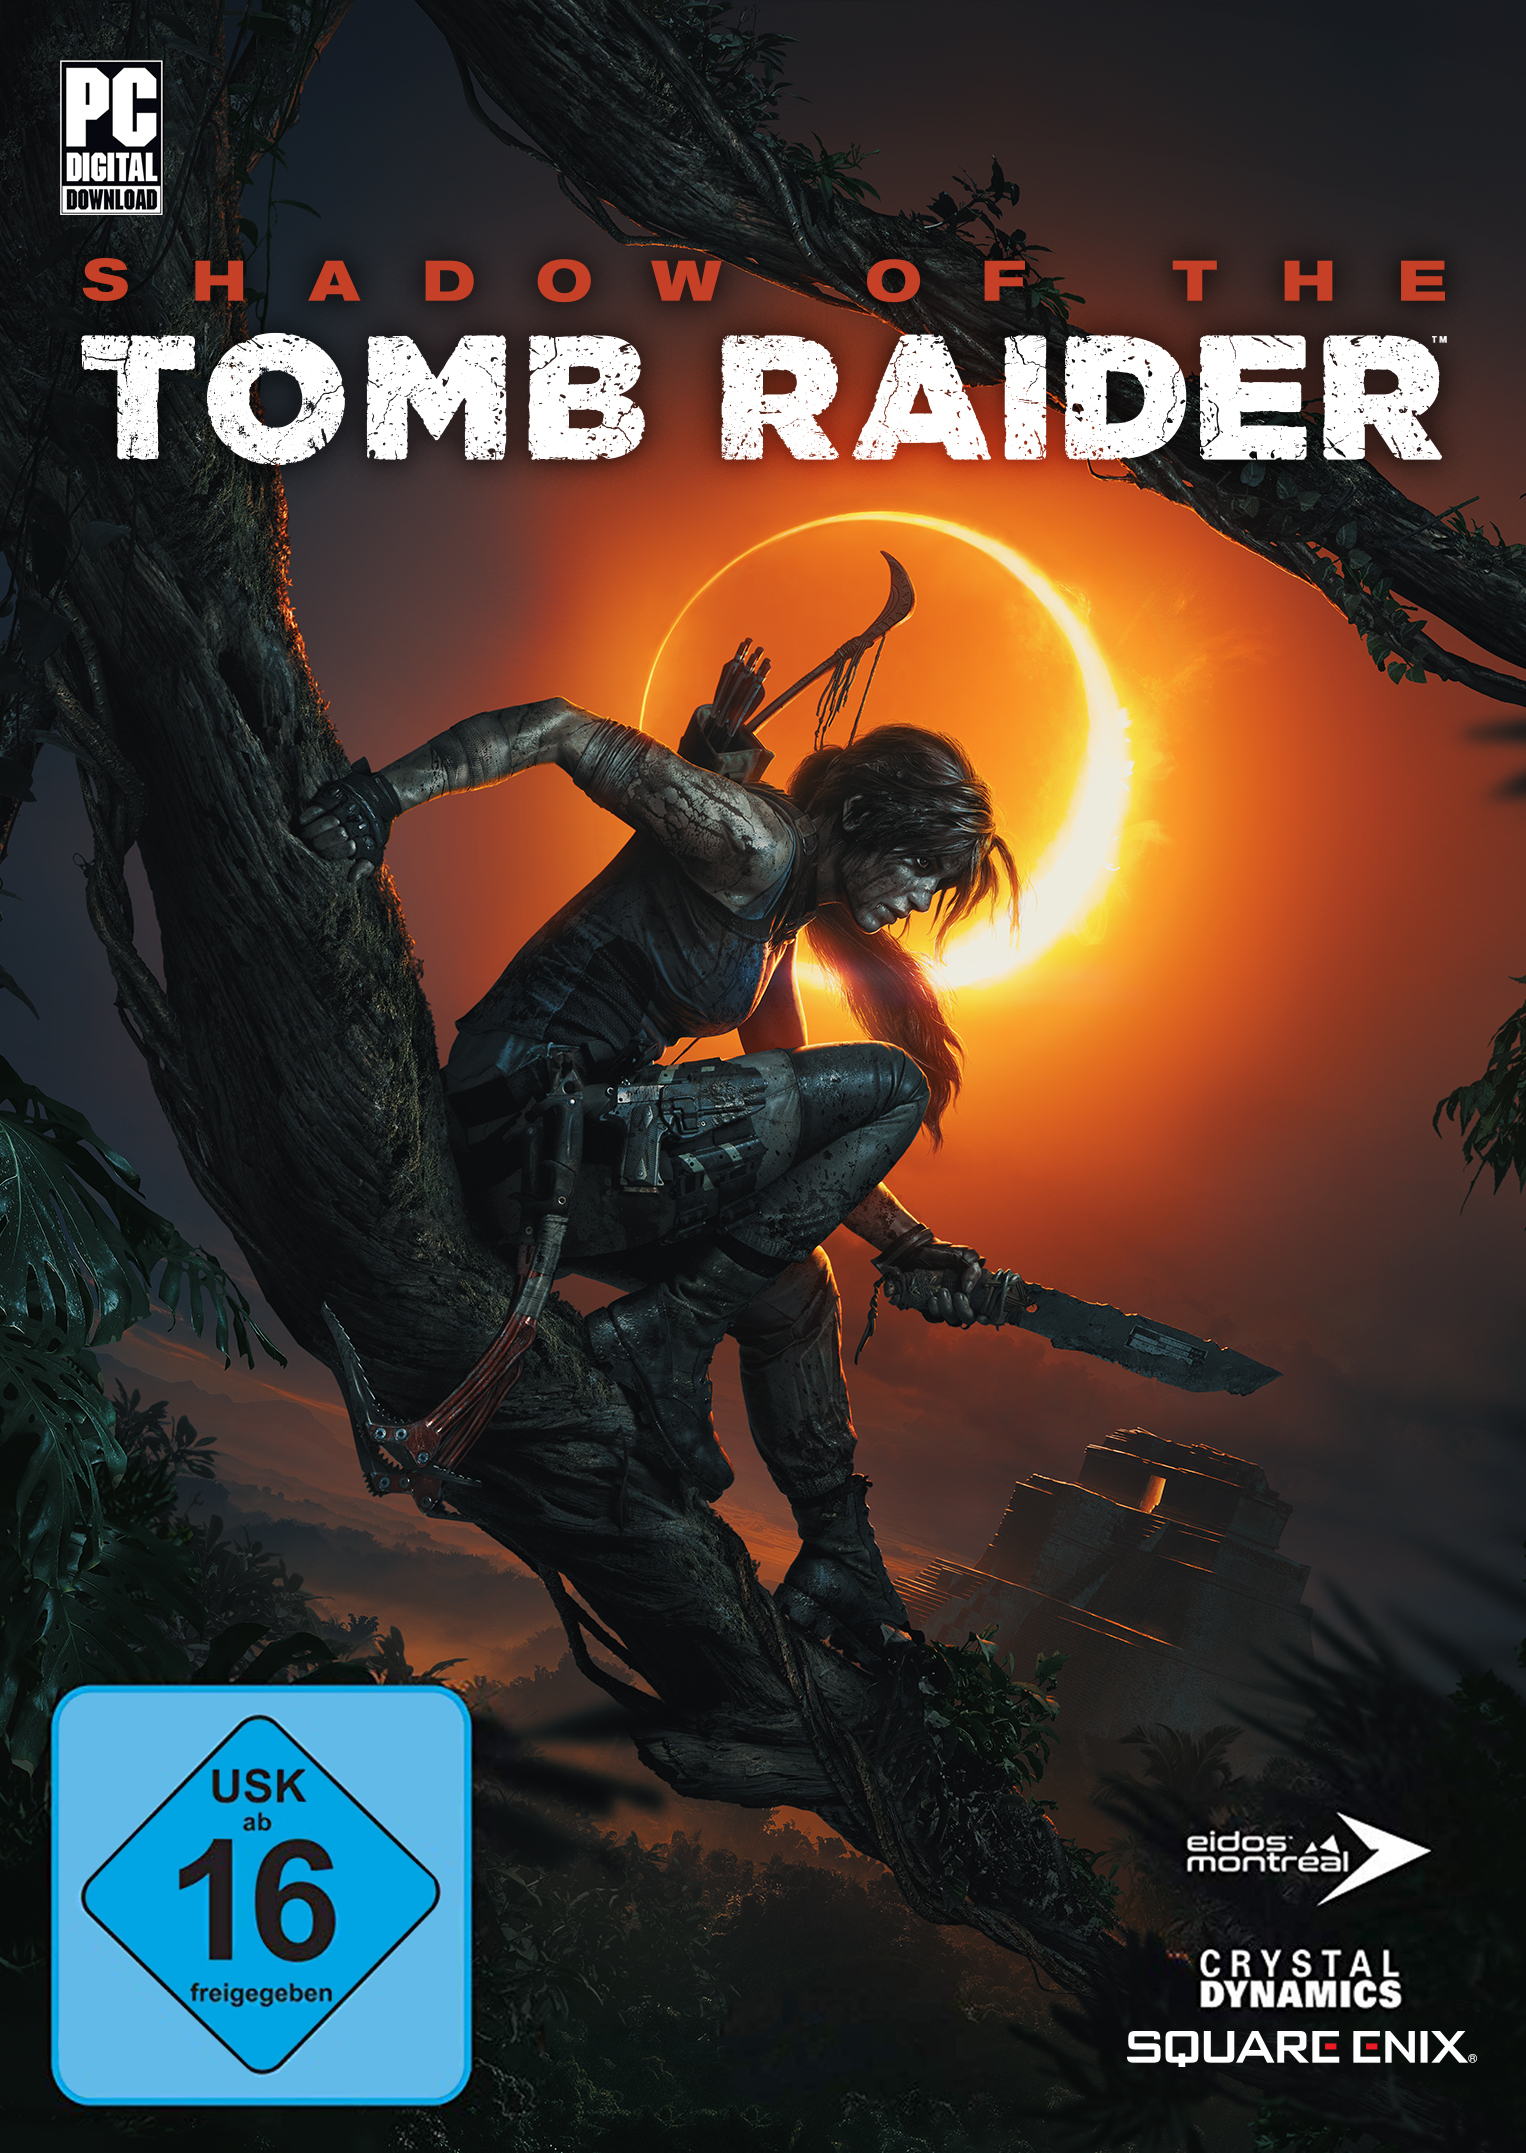 Boy] [Game - Tomb Raider the of Shadow